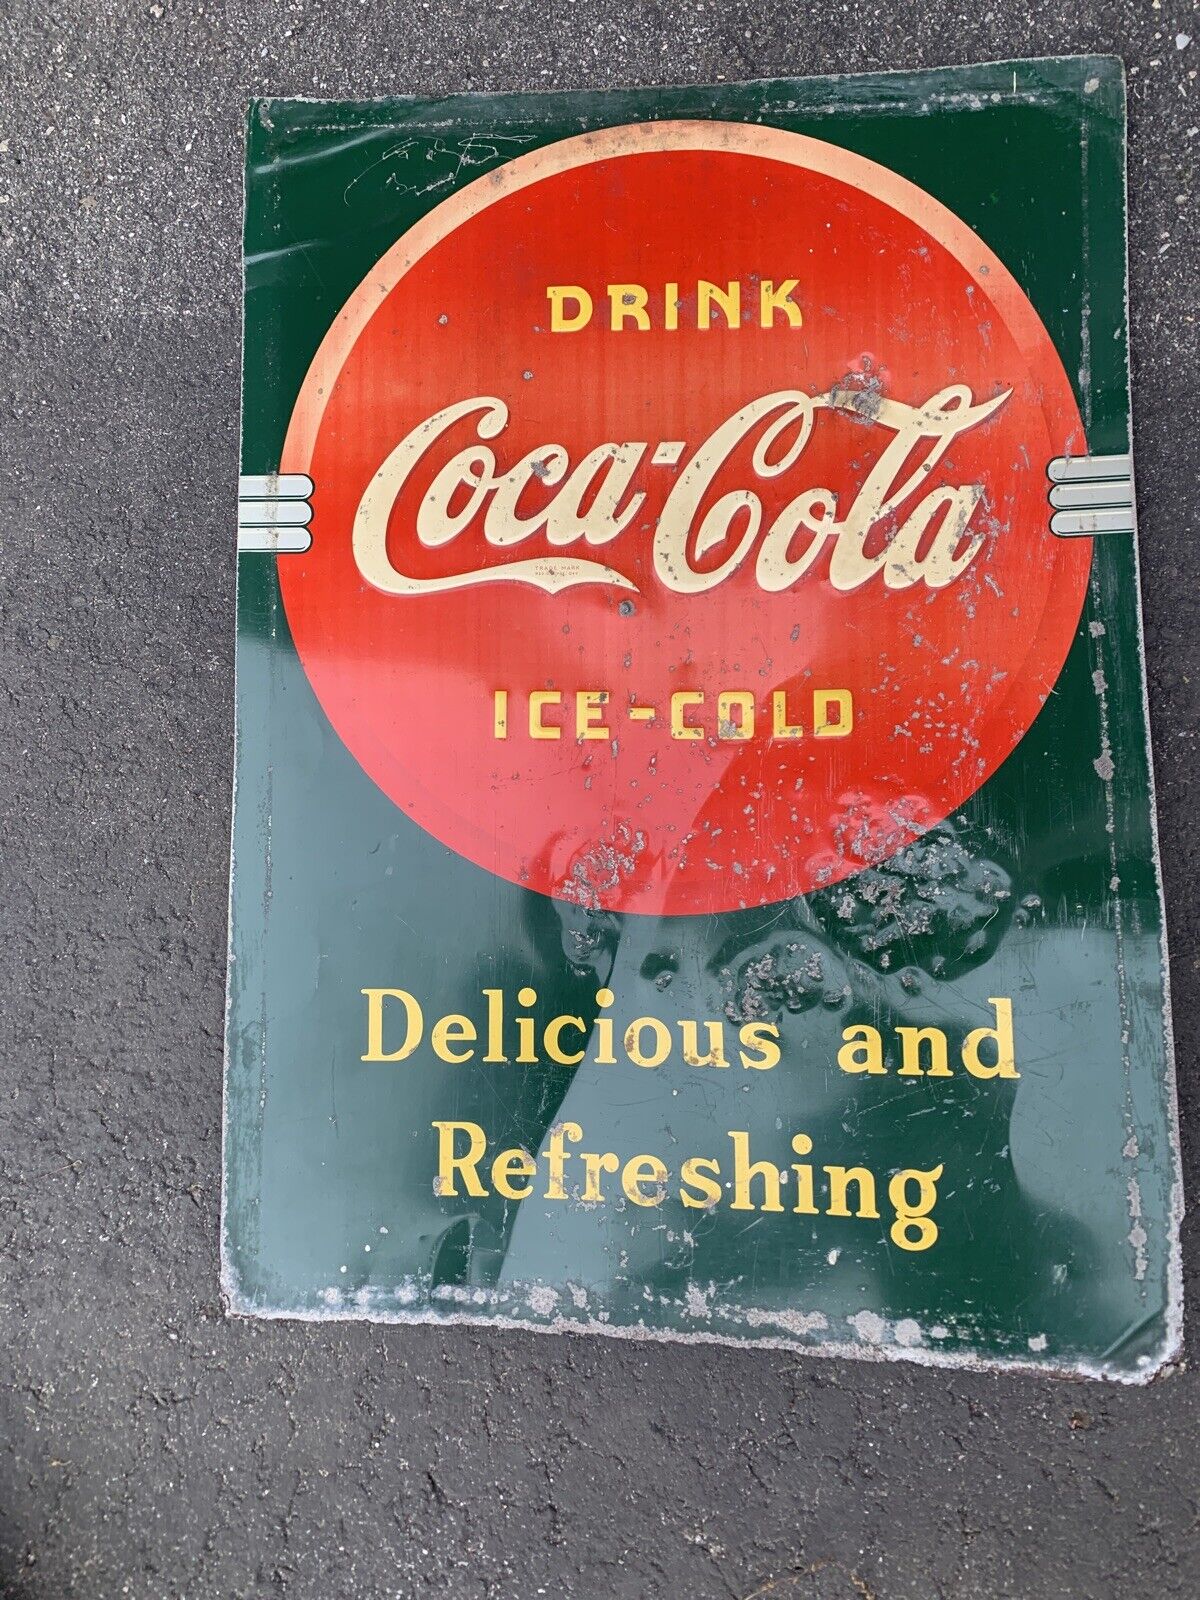 COCA COLA COKE VTG  1930s metal sign DELICIOUS AND REFRESHING DRINK 27.25x19.5 B